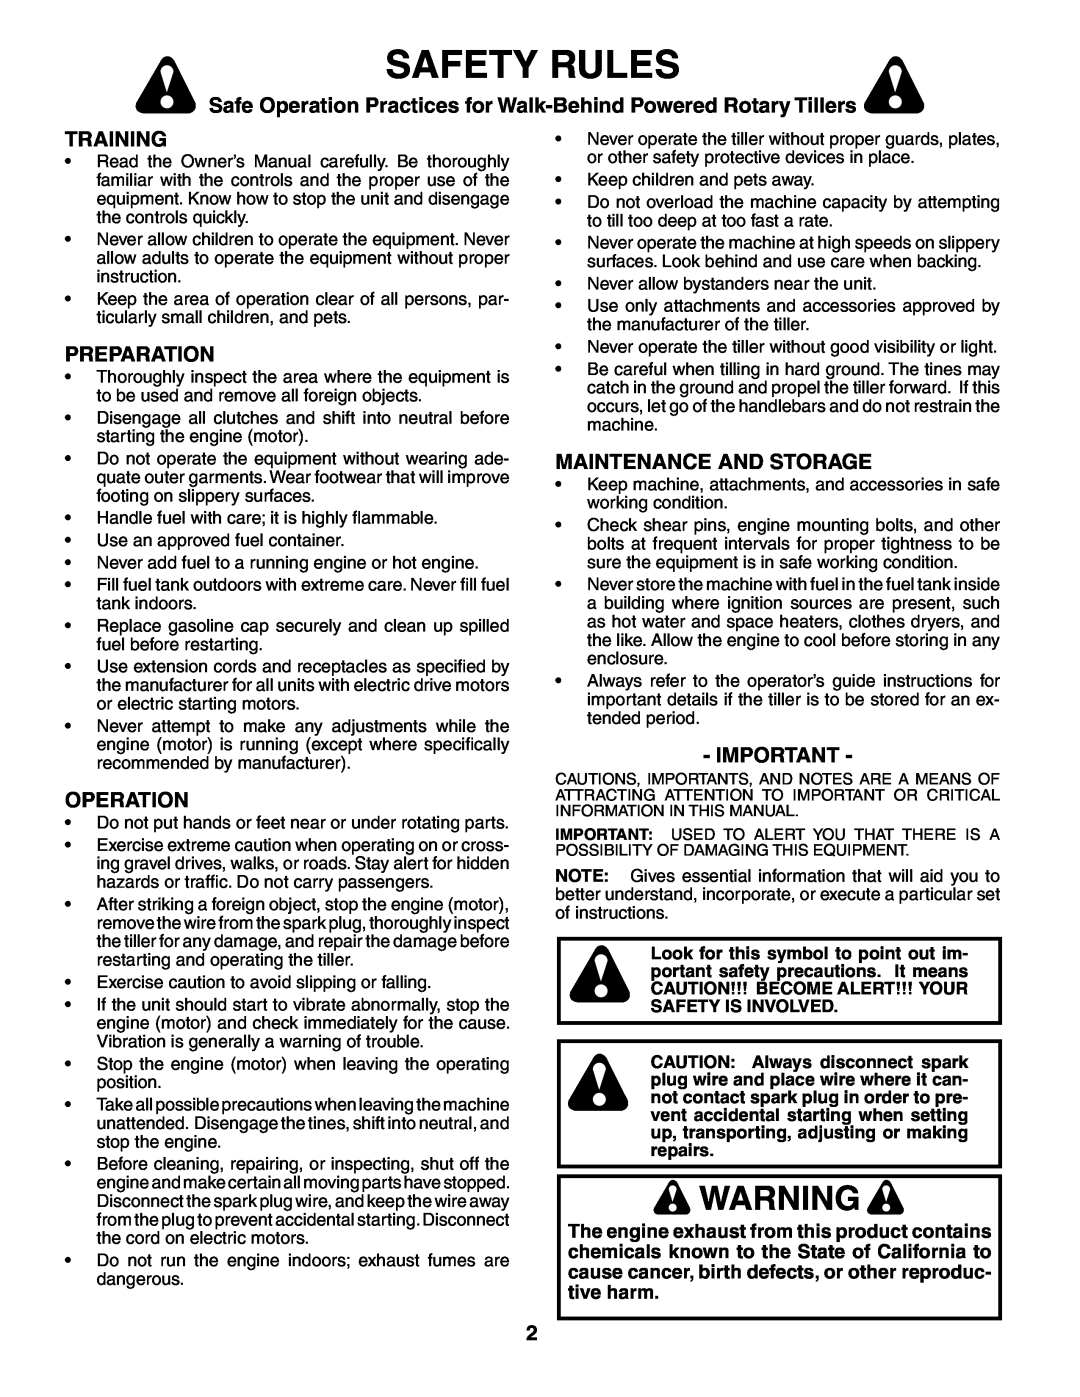 Poulan PRRT65D owner manual Safety Rules, Training, Preparation, Operation, Maintenance And Storage 